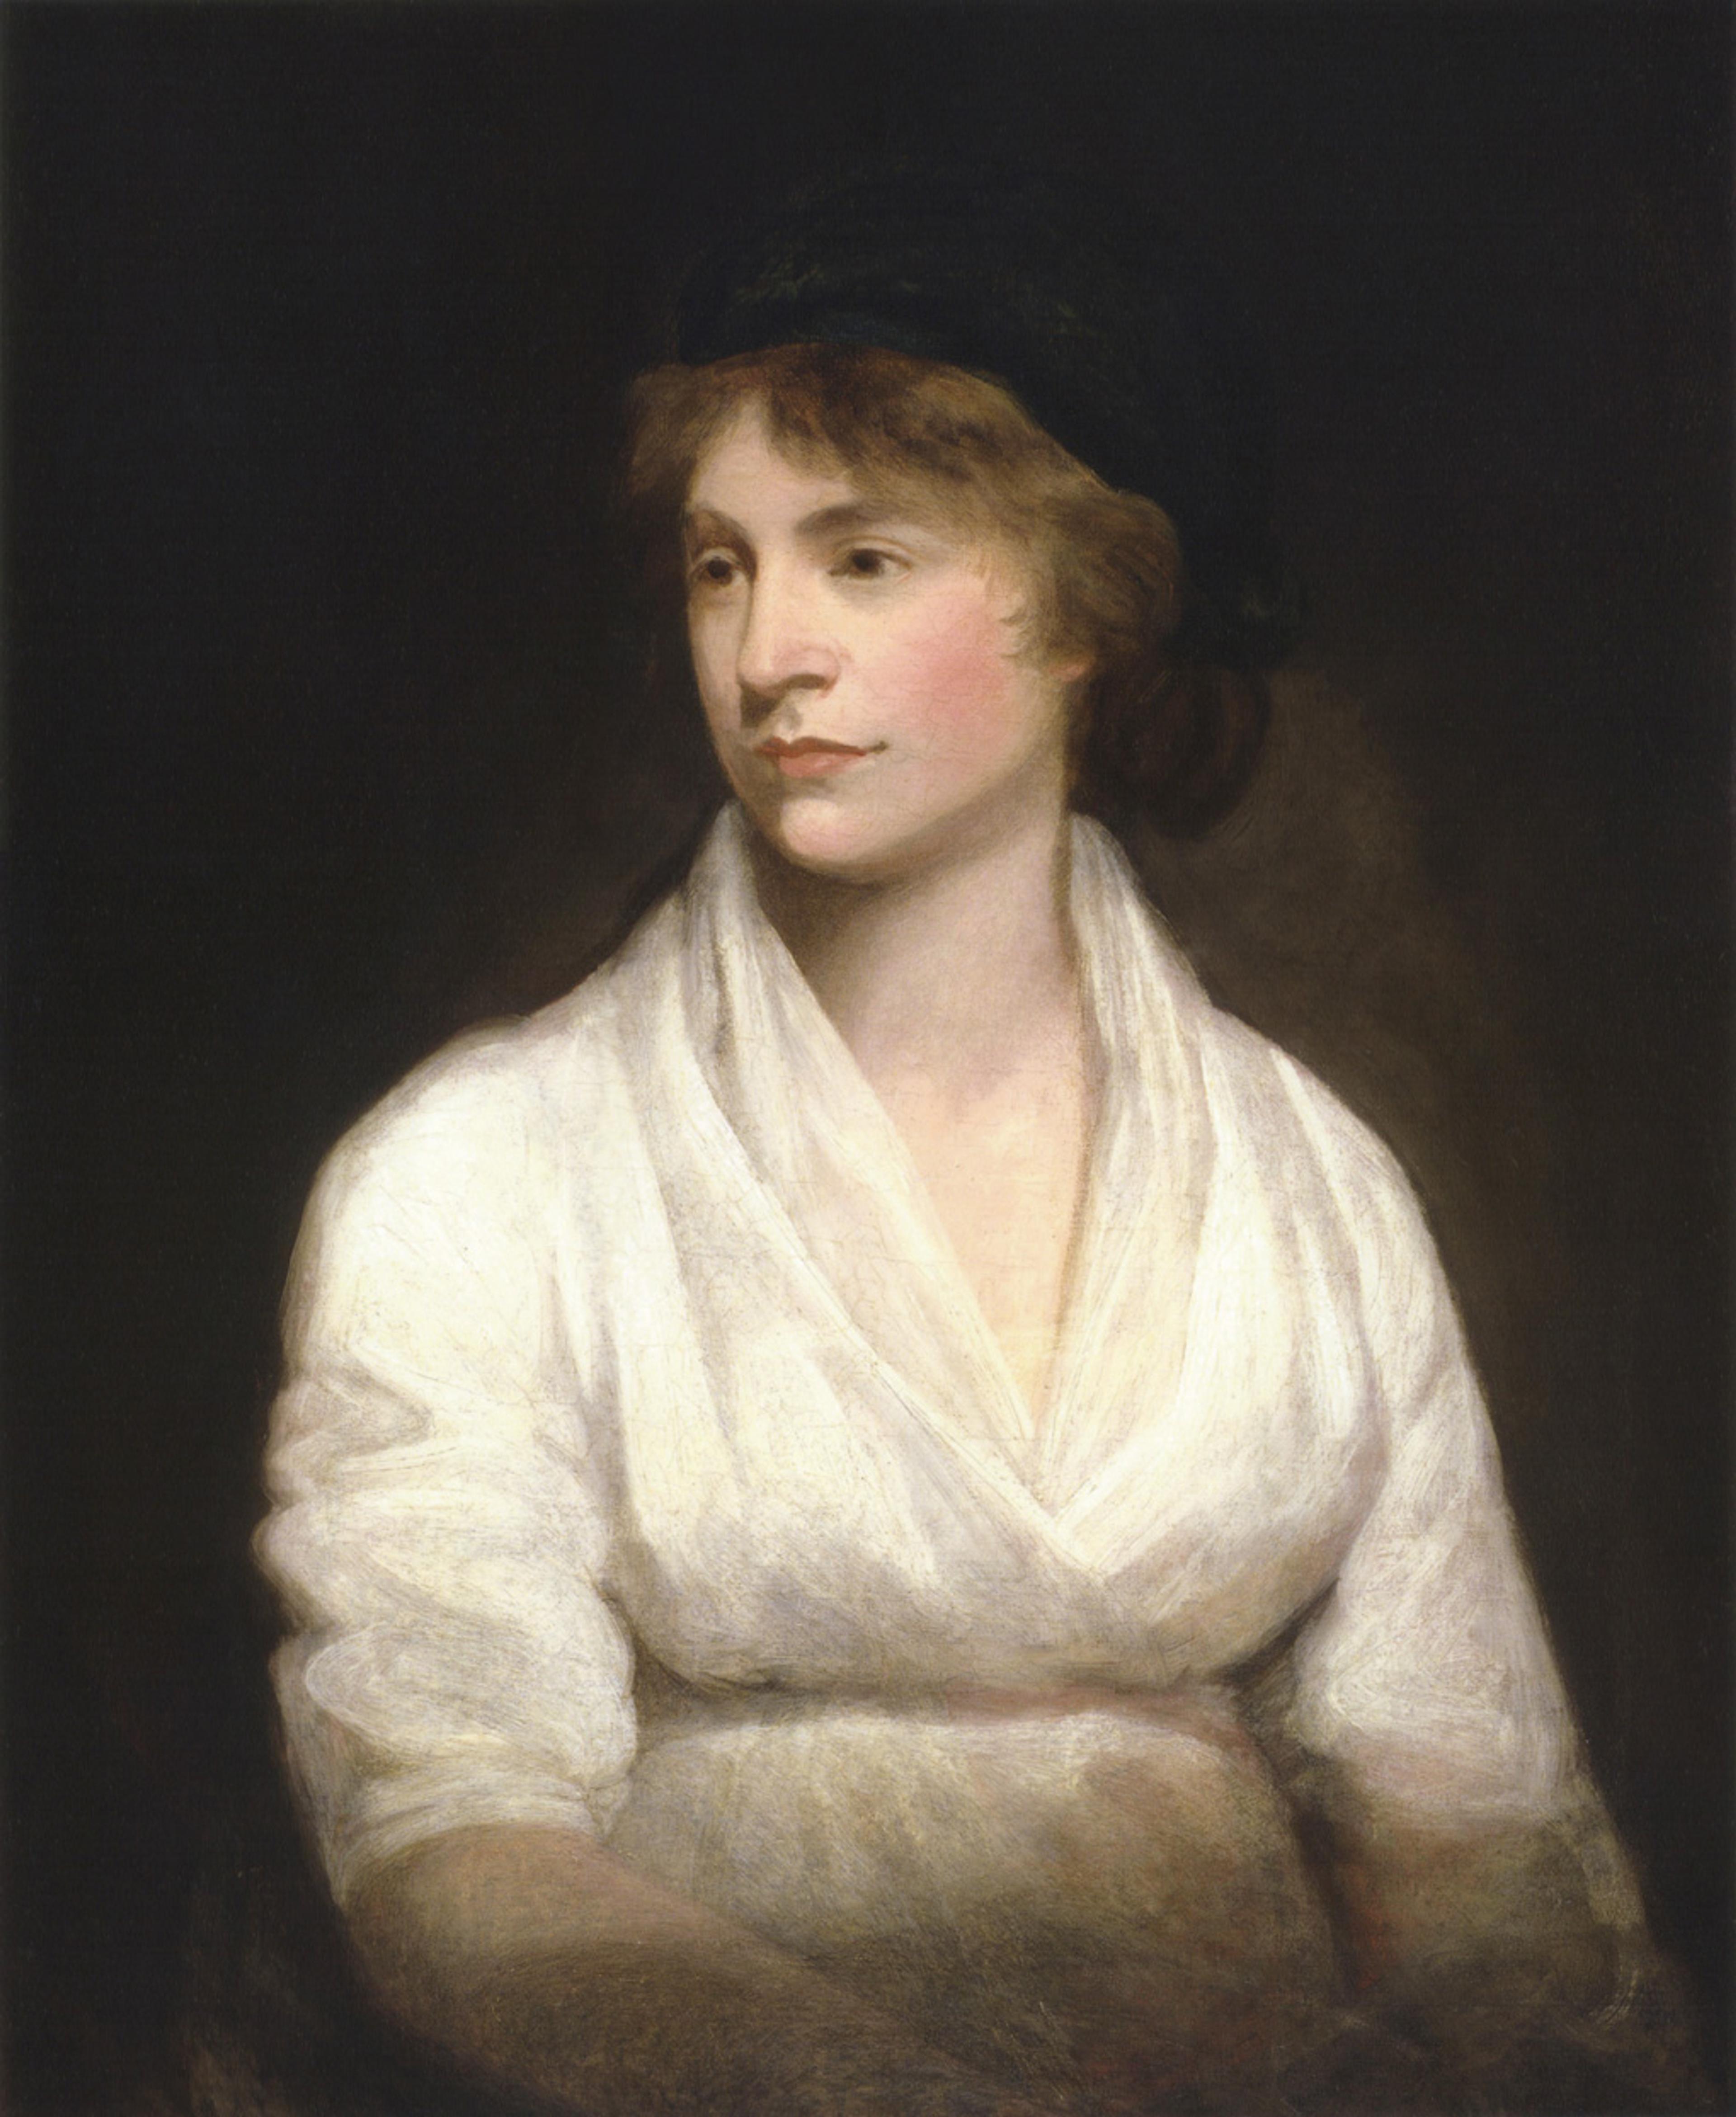 A classical portrait painting of a young woman with short curly hair wearing a white dress with a deep V-neck. She is facing forward but looking slightly to her left, set against a dark background. The painting style suggests it is from an earlier historical period.